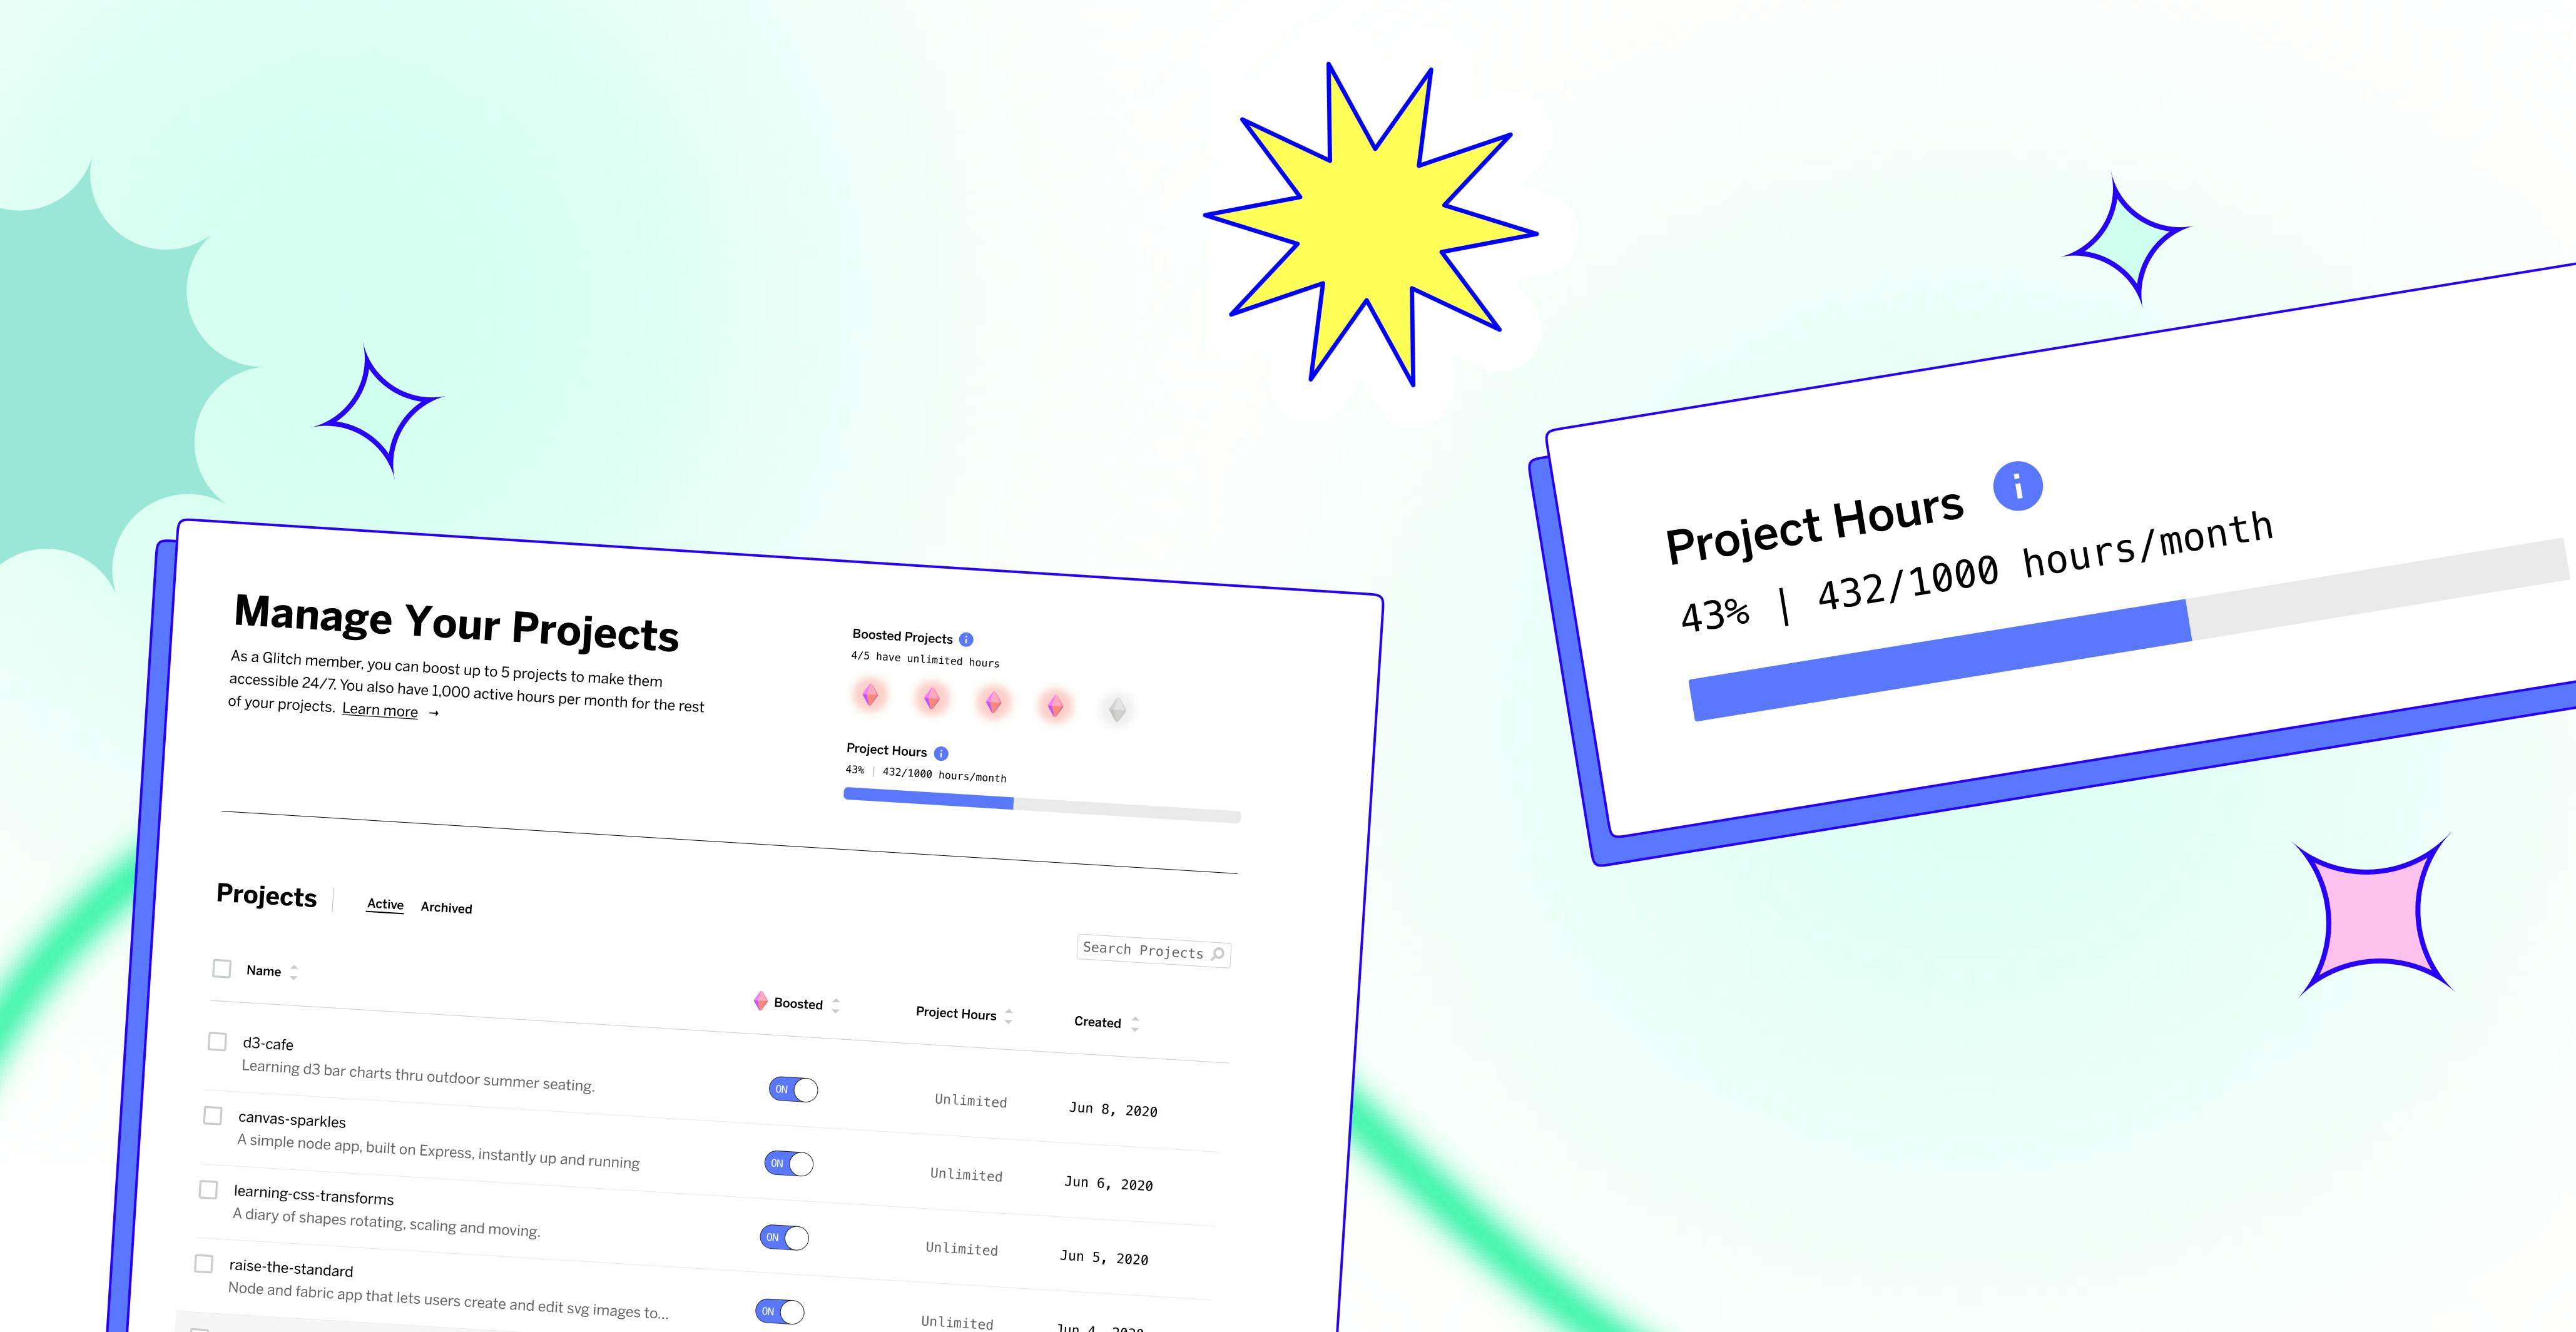 1000 Free Project Hours - What does that mean?! from Glitch - Desktop Email  View